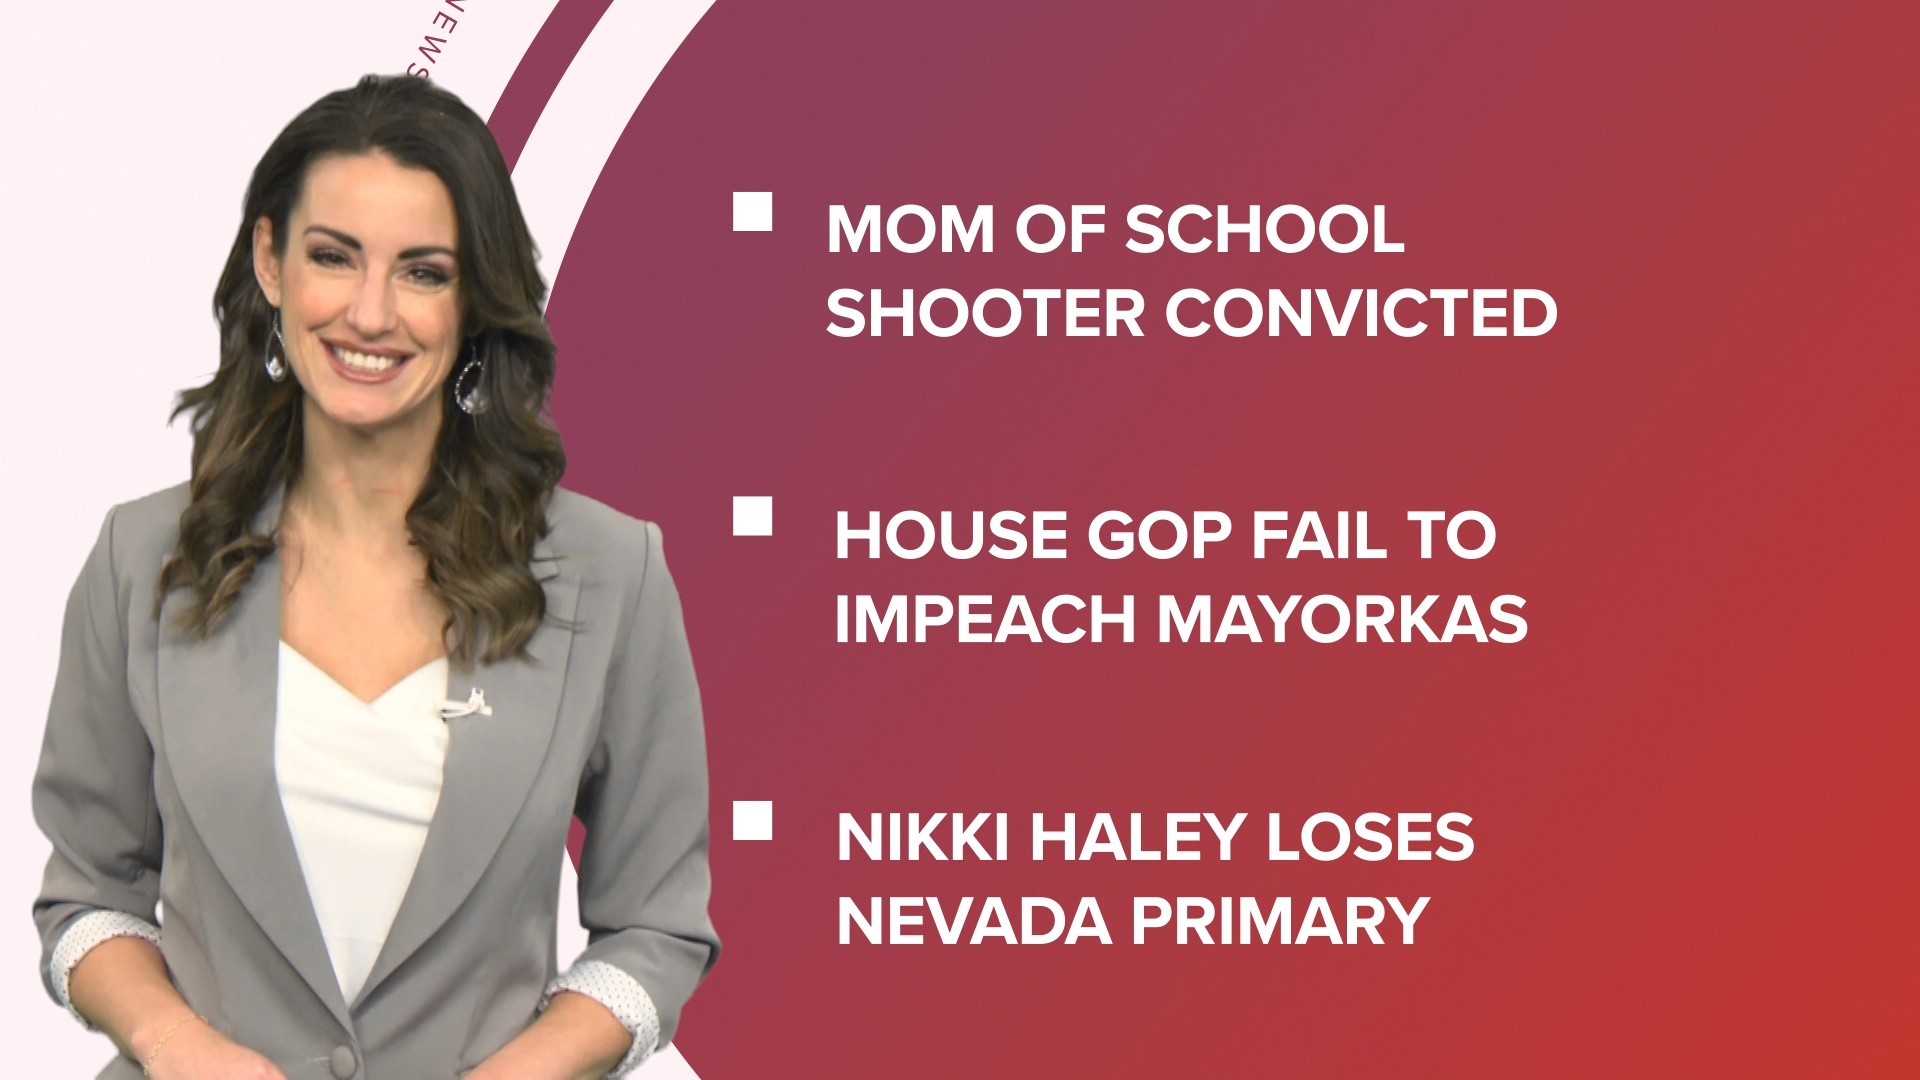 A look at what is happening in the news from the mother of a school shooter convicted on charges to House Republicans failing to impeach Sec. Mayorkas.